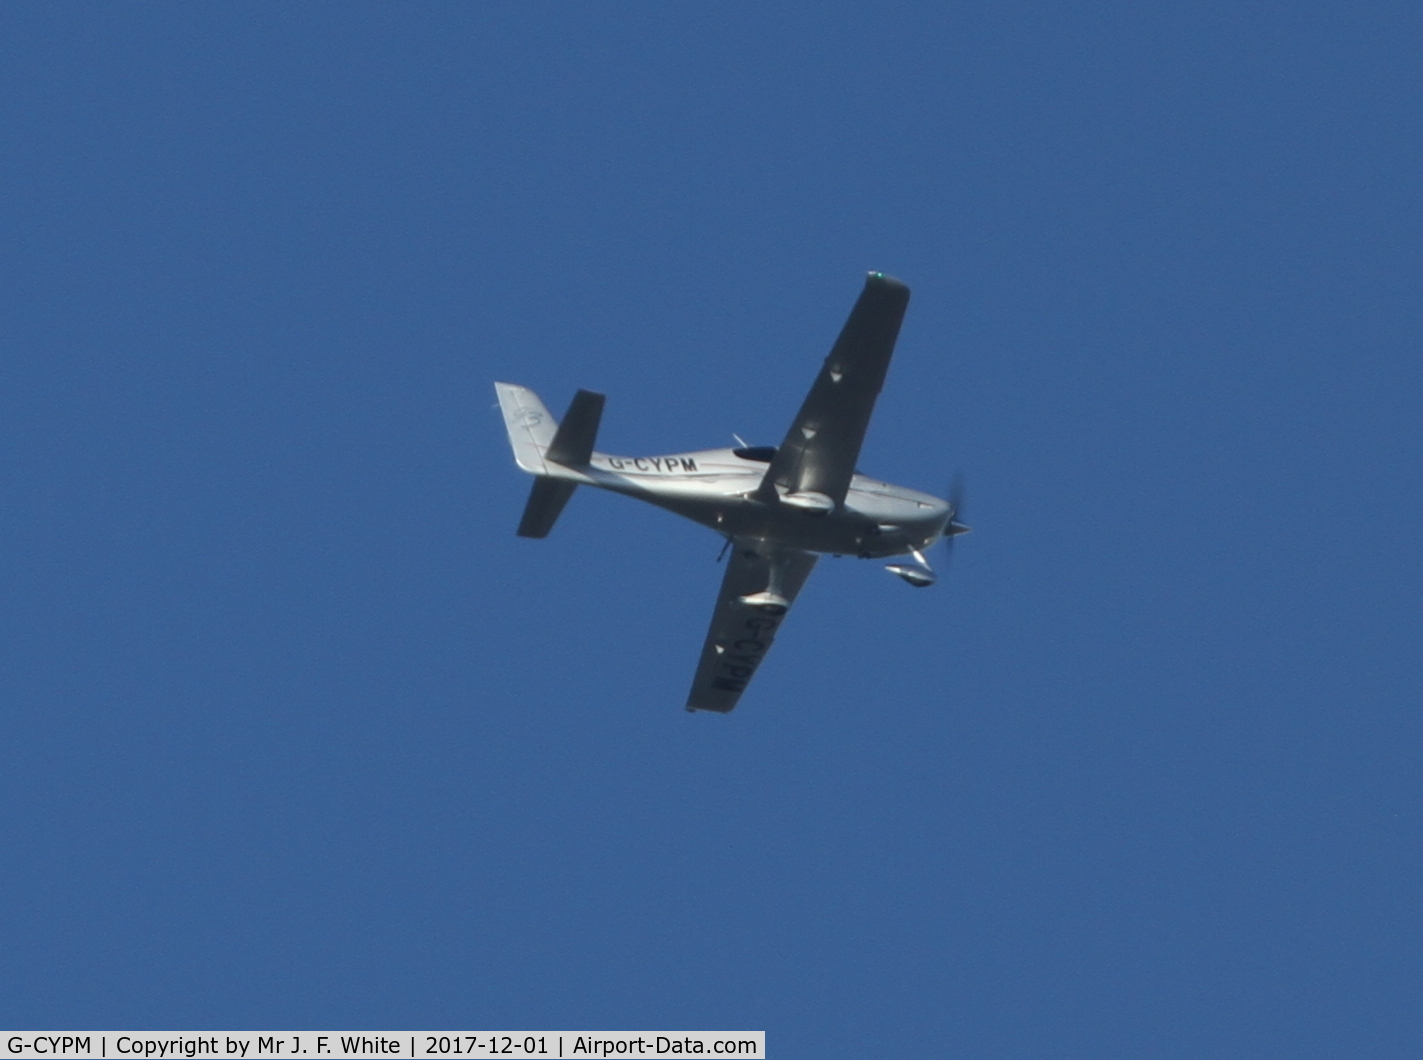 G-CYPM, 2008 Cirrus SR22 G3 GTS C/N 3185, Shot taken from my backyard today-01.12.17.
Long shot taken with a Canon 7D +70-200 EF lens with EF 2xMK3 extender & then cropped.